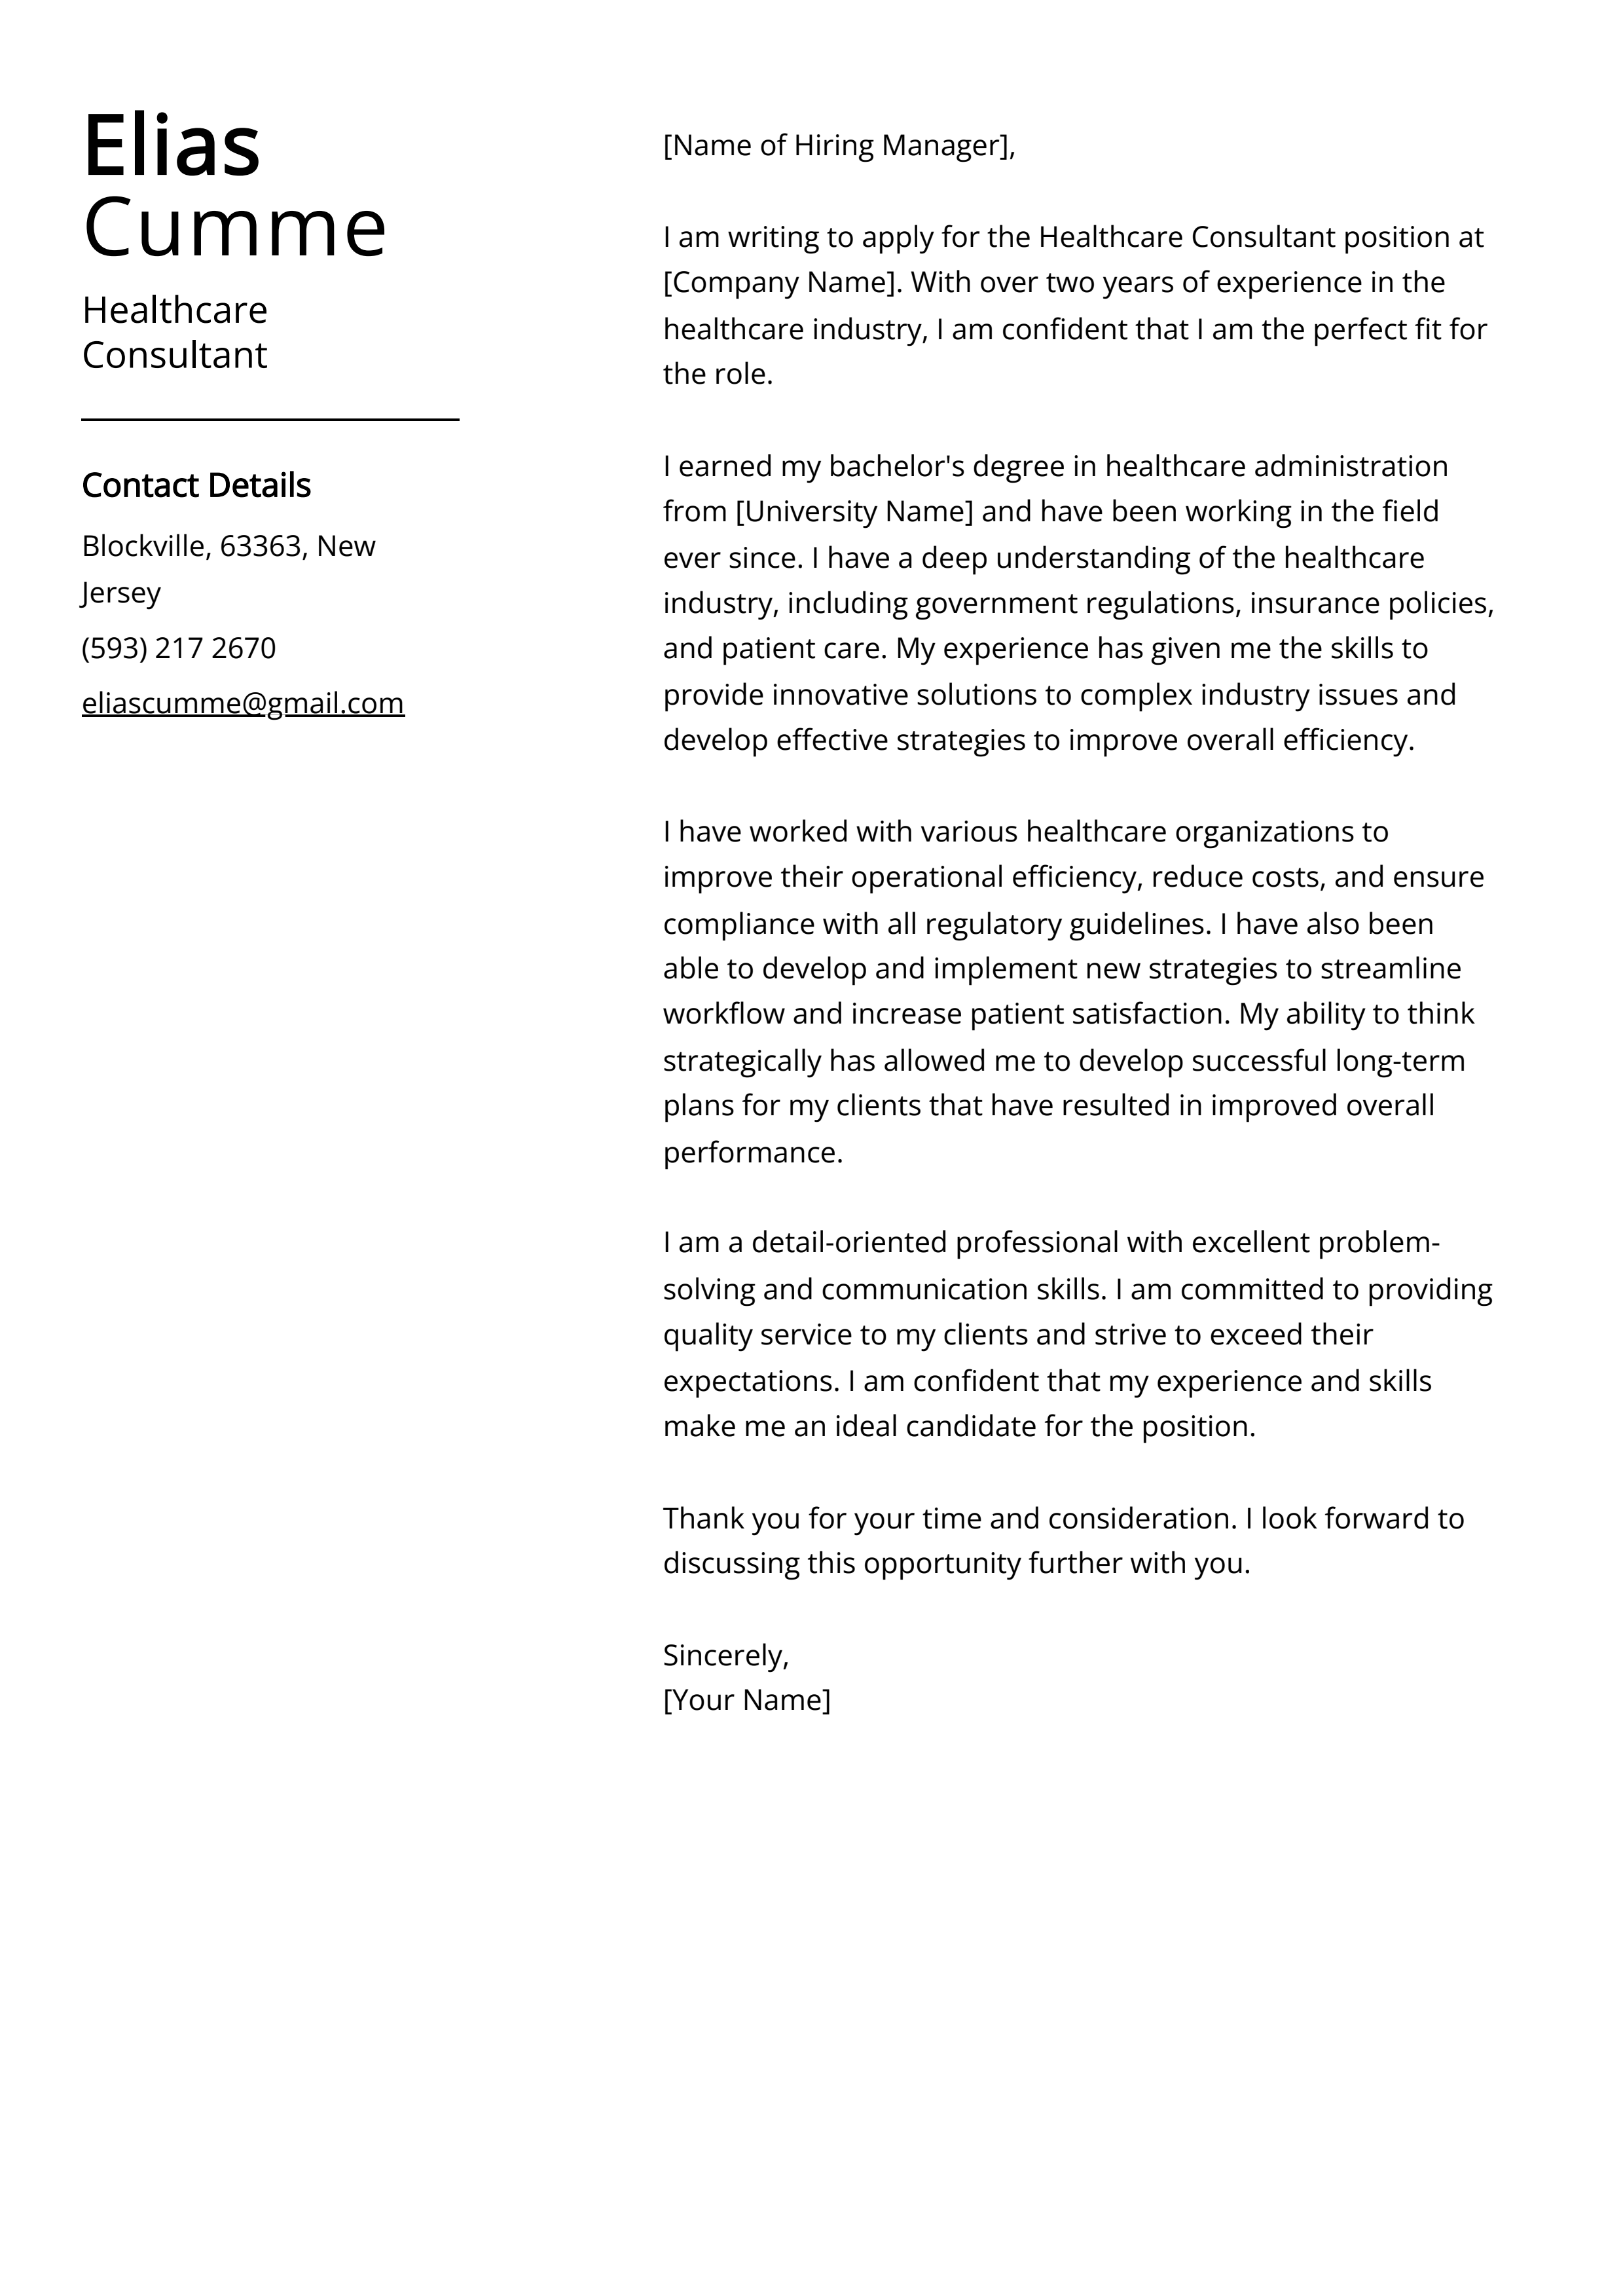 Healthcare Consultant Cover Letter Example